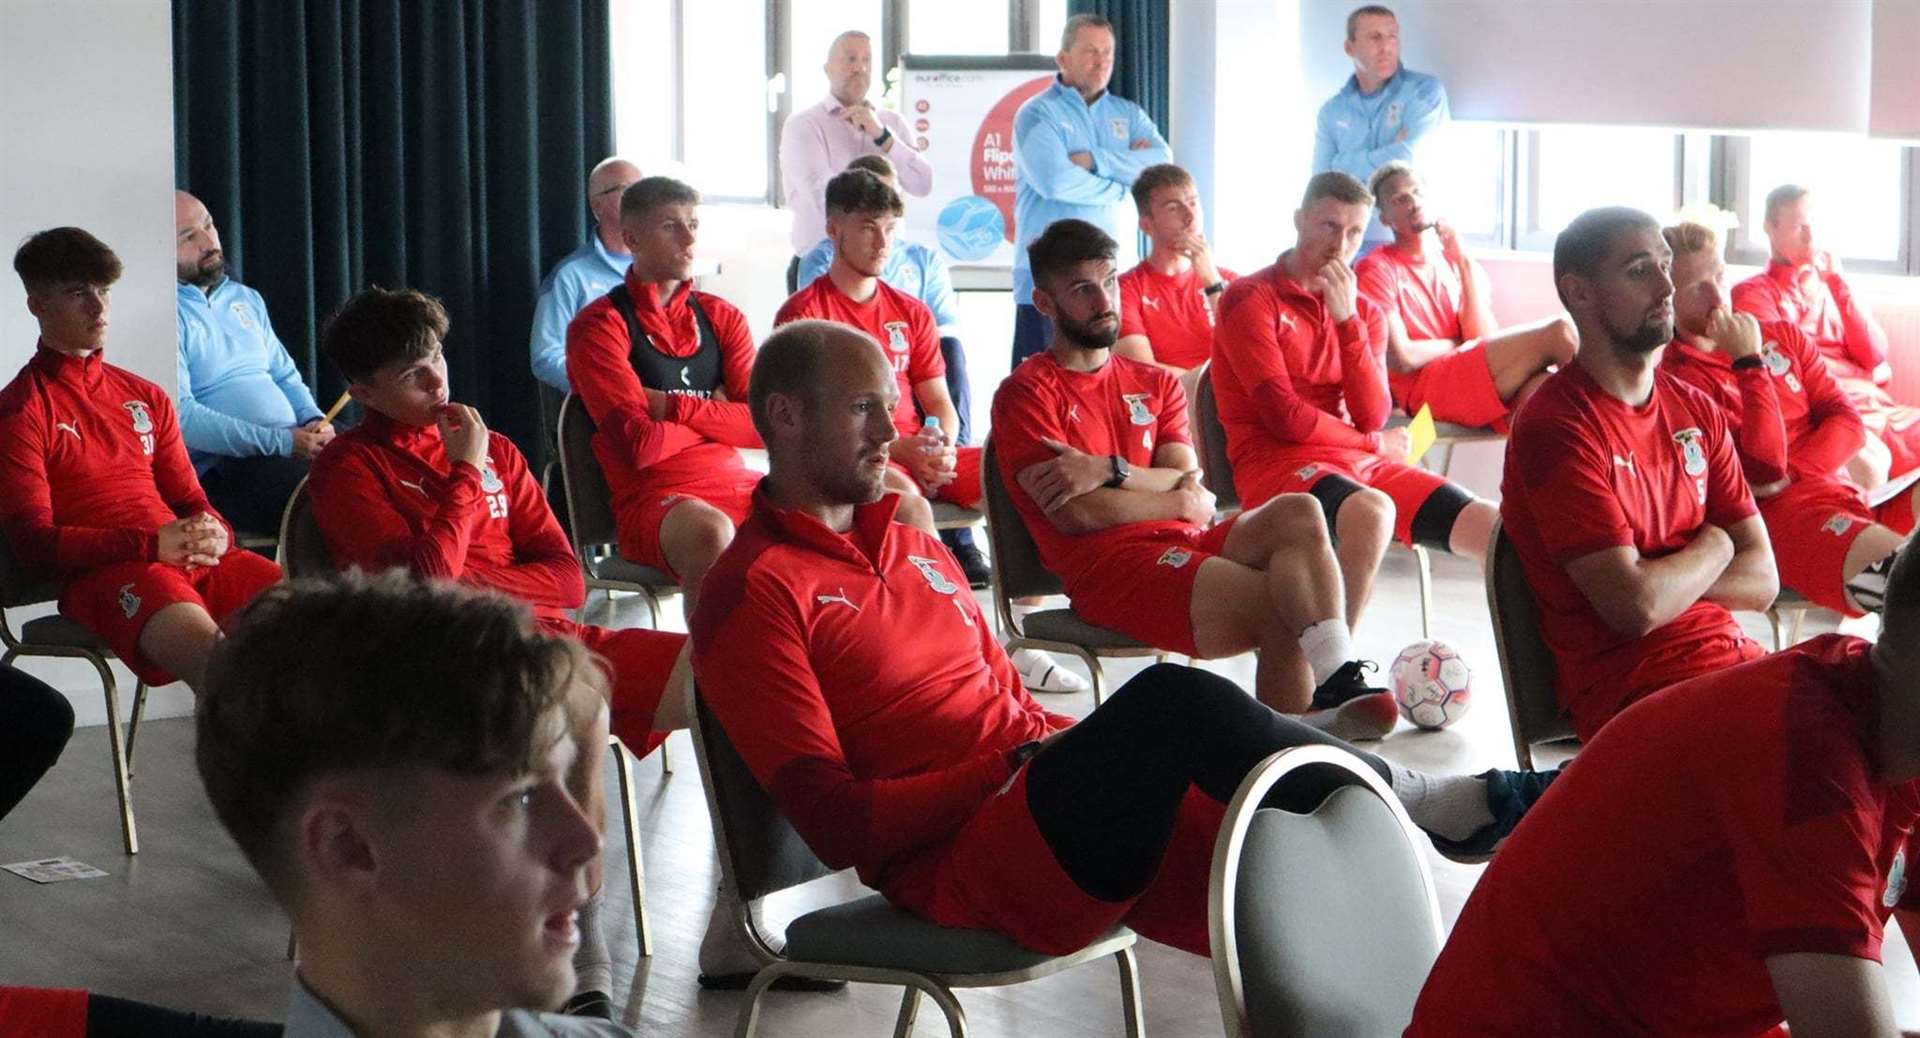 The Caley Thistle squad listen intently to Mikeysline's talk on mental health matters